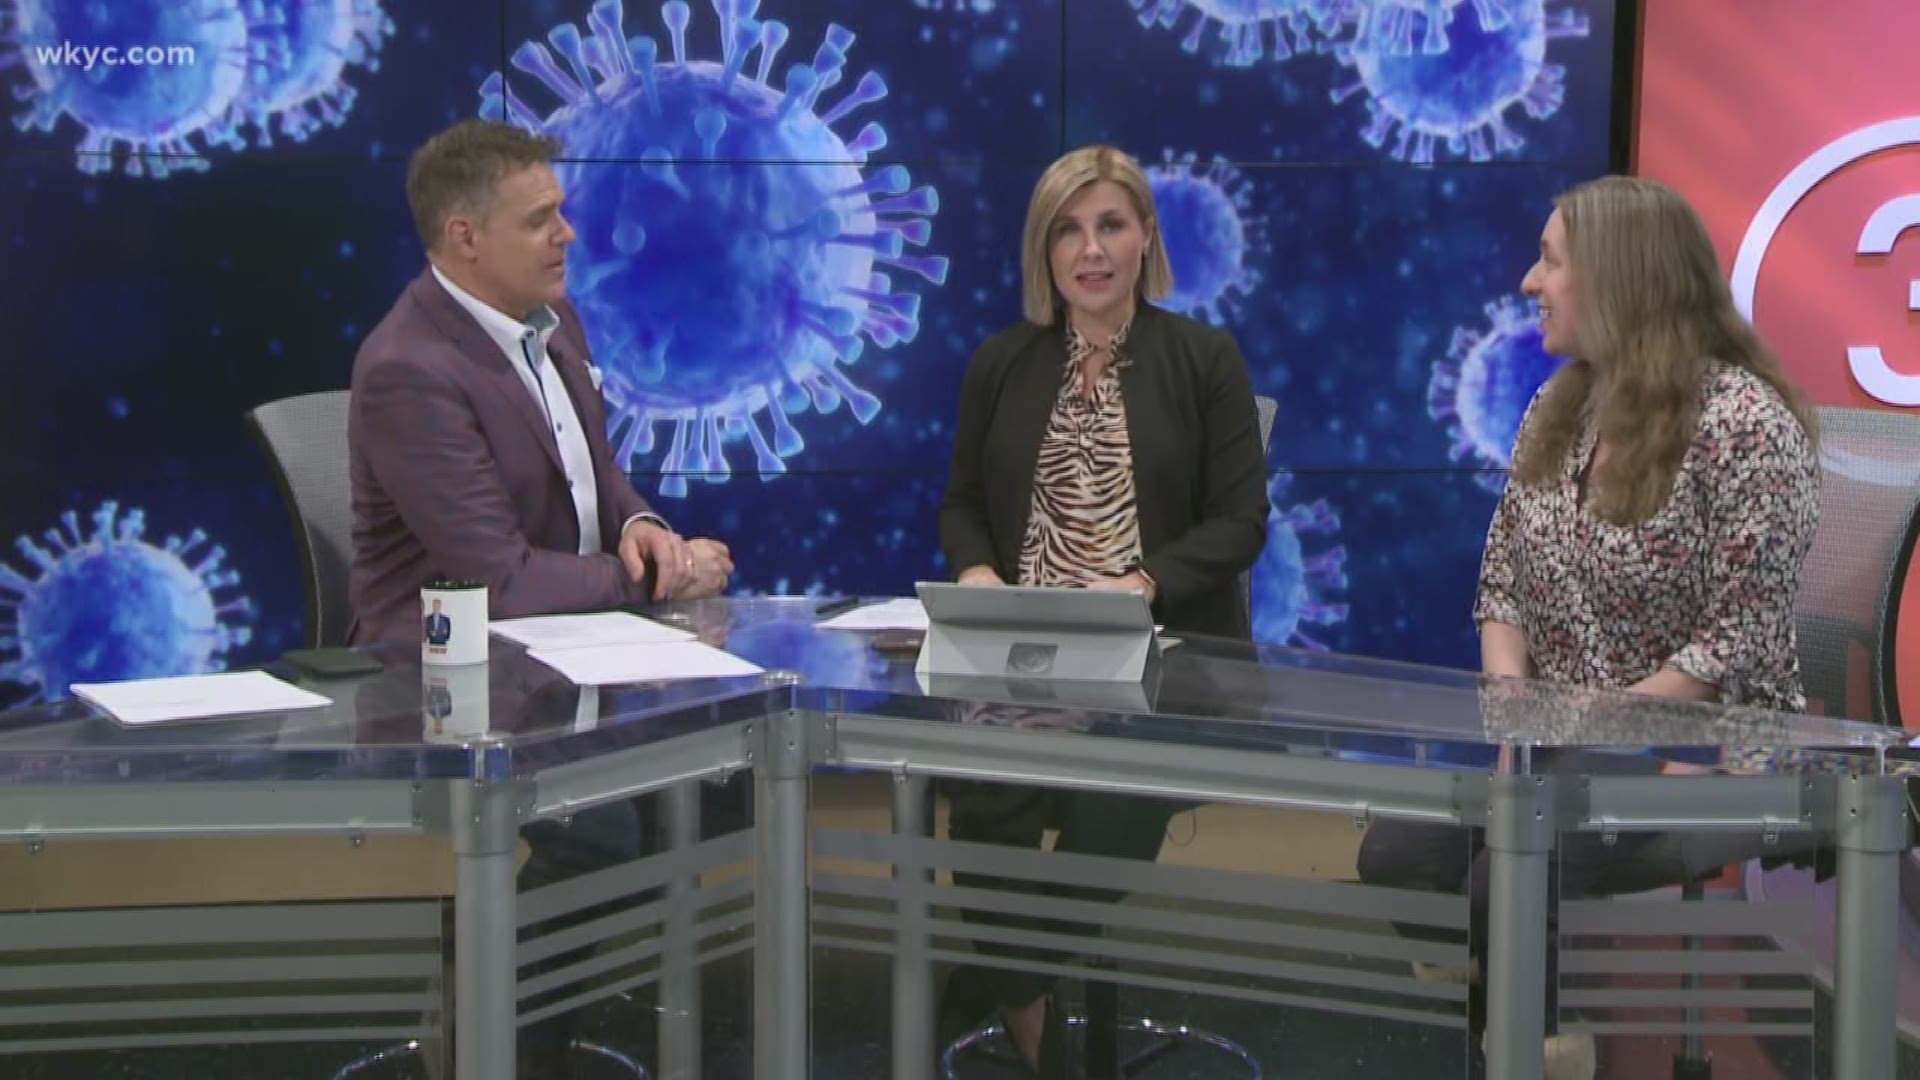 Dr. Amy Edwards from University Hospitals joins Jay Crawford and Sara Shookman. What do you need to know to protect yourself from coronavirus?